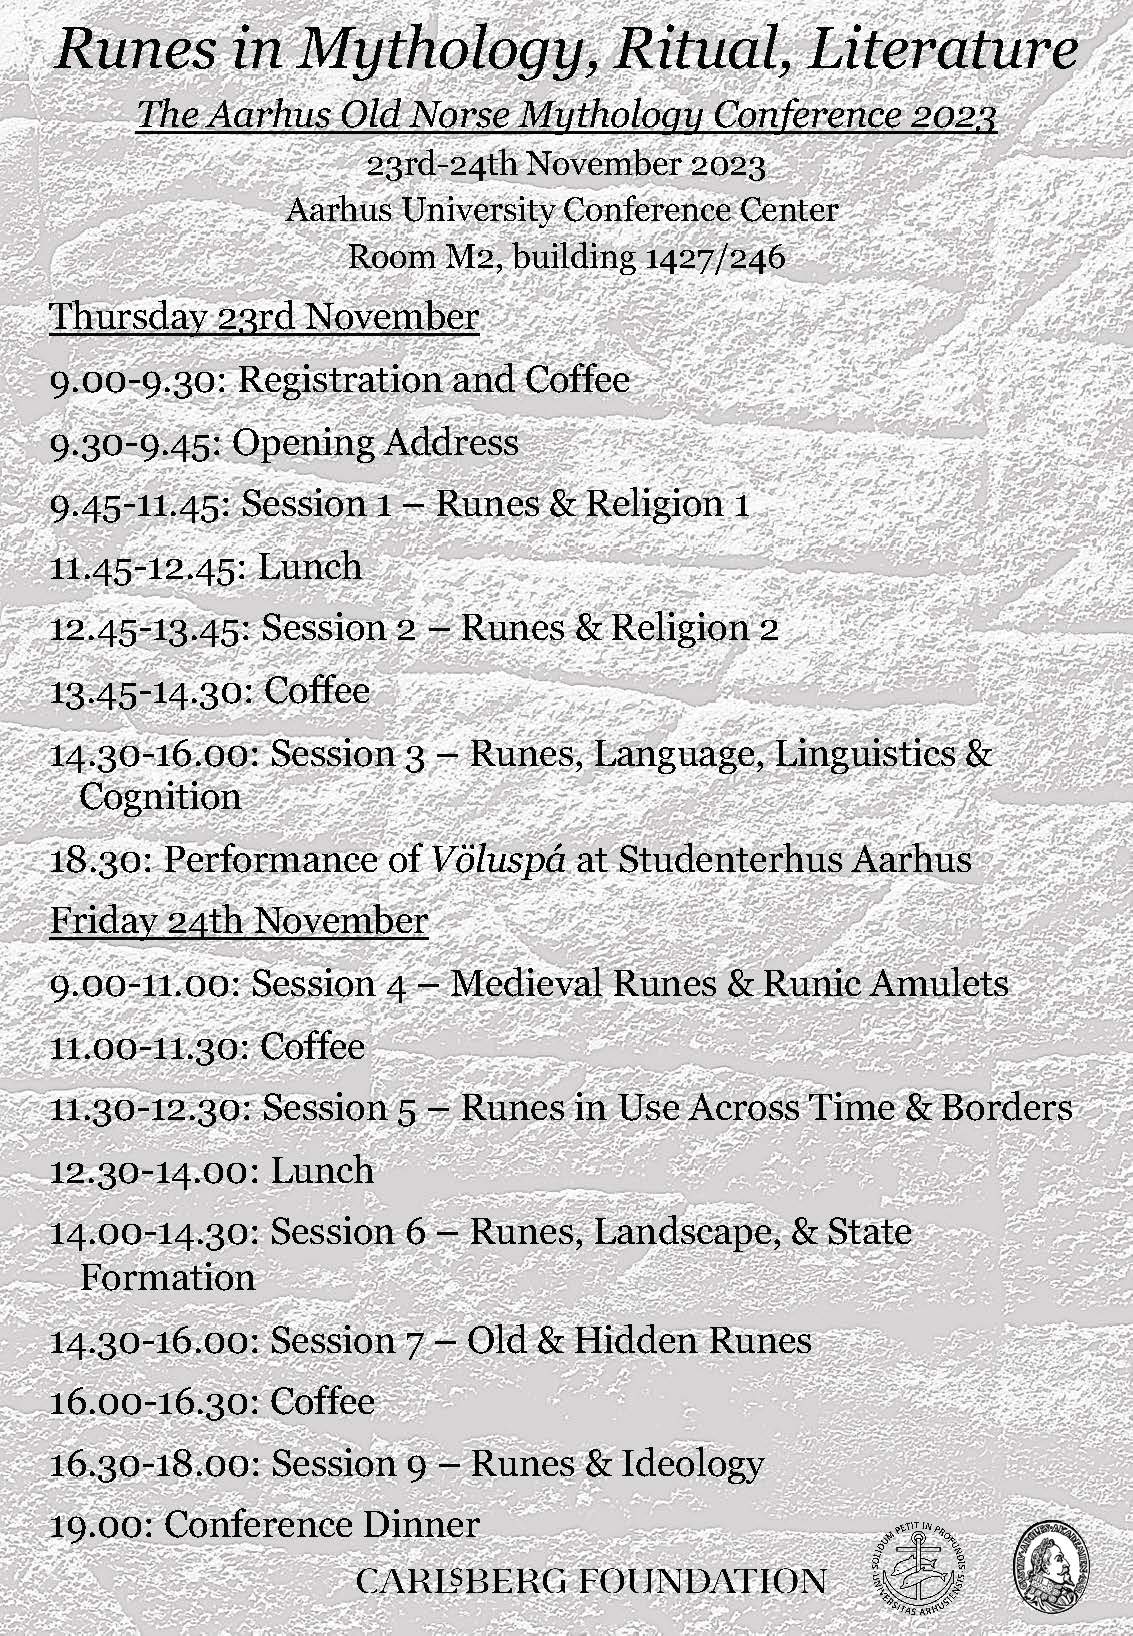 Poster with session names and time slots for the conference Runes in Mythology, Ritual, Literature: The Aarhus Old Norse Mythology Conference 2023.